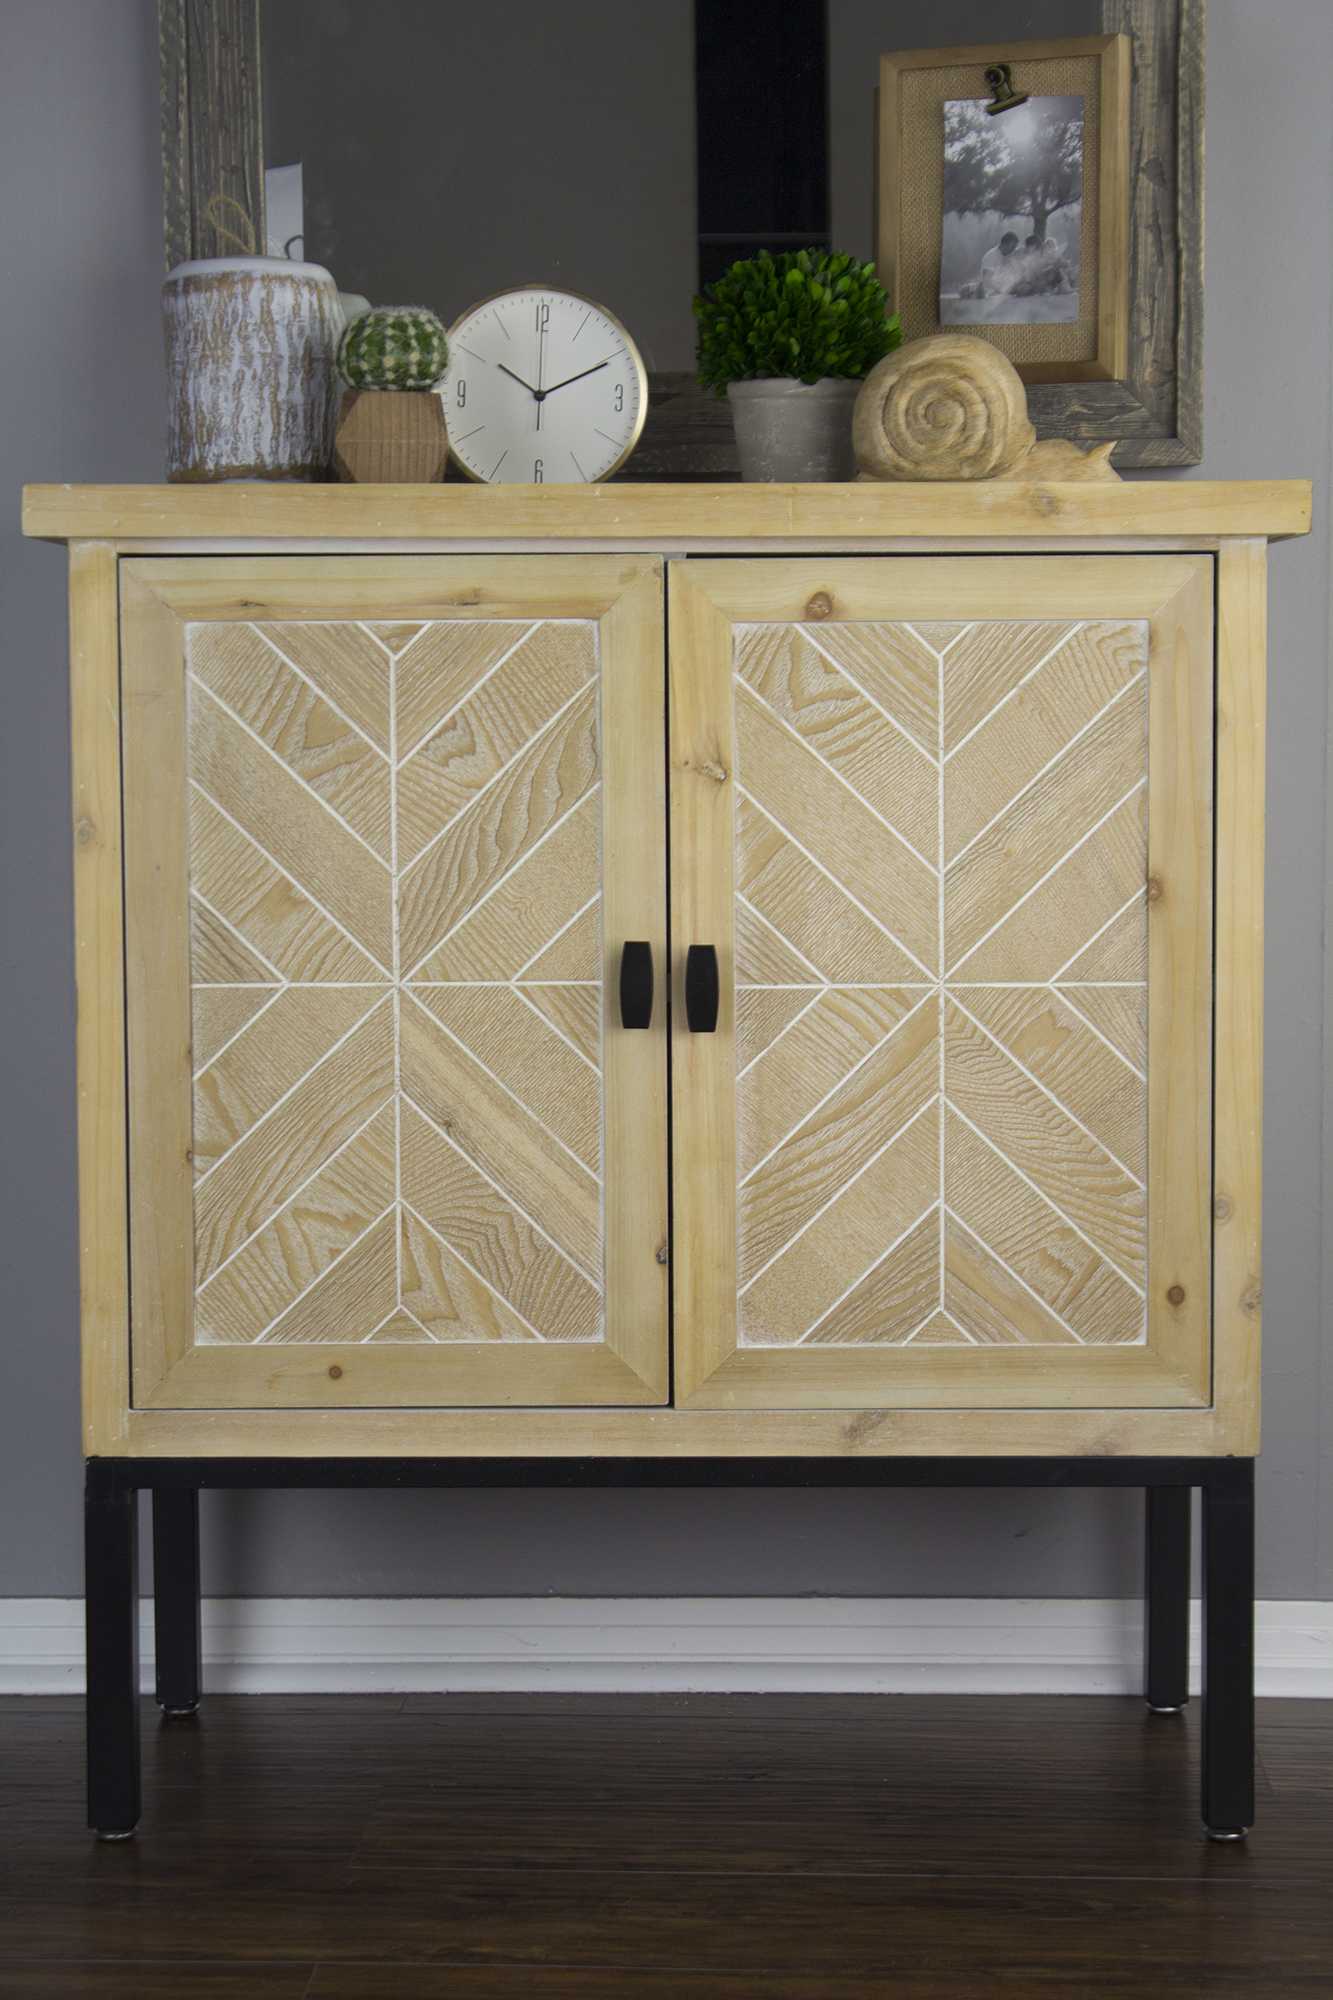 31.5" X 15" X 33.8" White Washed Parquet Iron Wood MDF Sideboard with an Iron Frame and Wood Doors